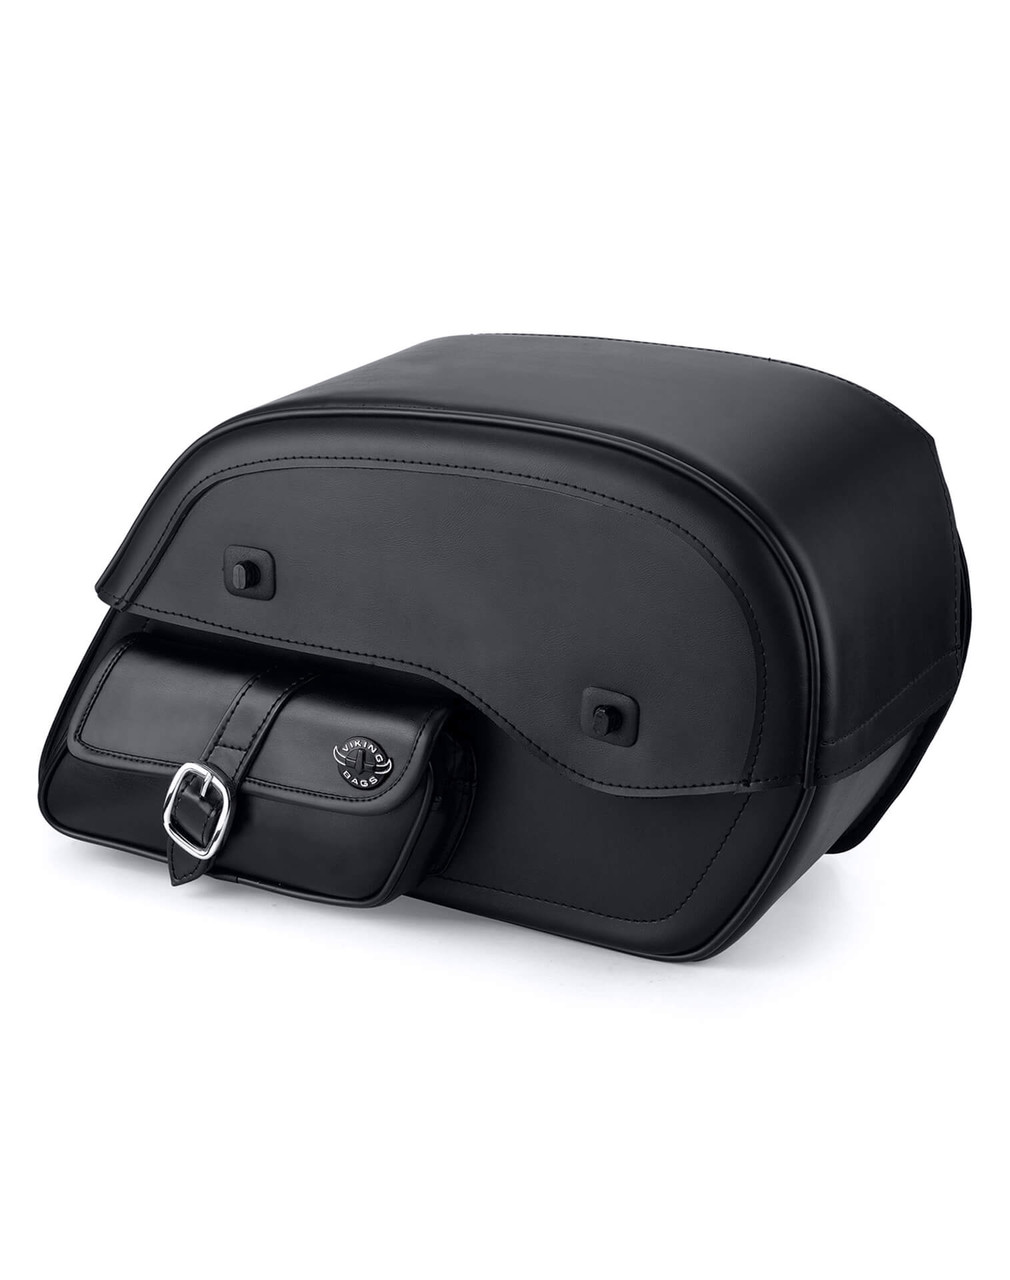 Indian Chief Standard Uaniversal Side Pocket Large Motorcycle Saddlebags Main Bag View